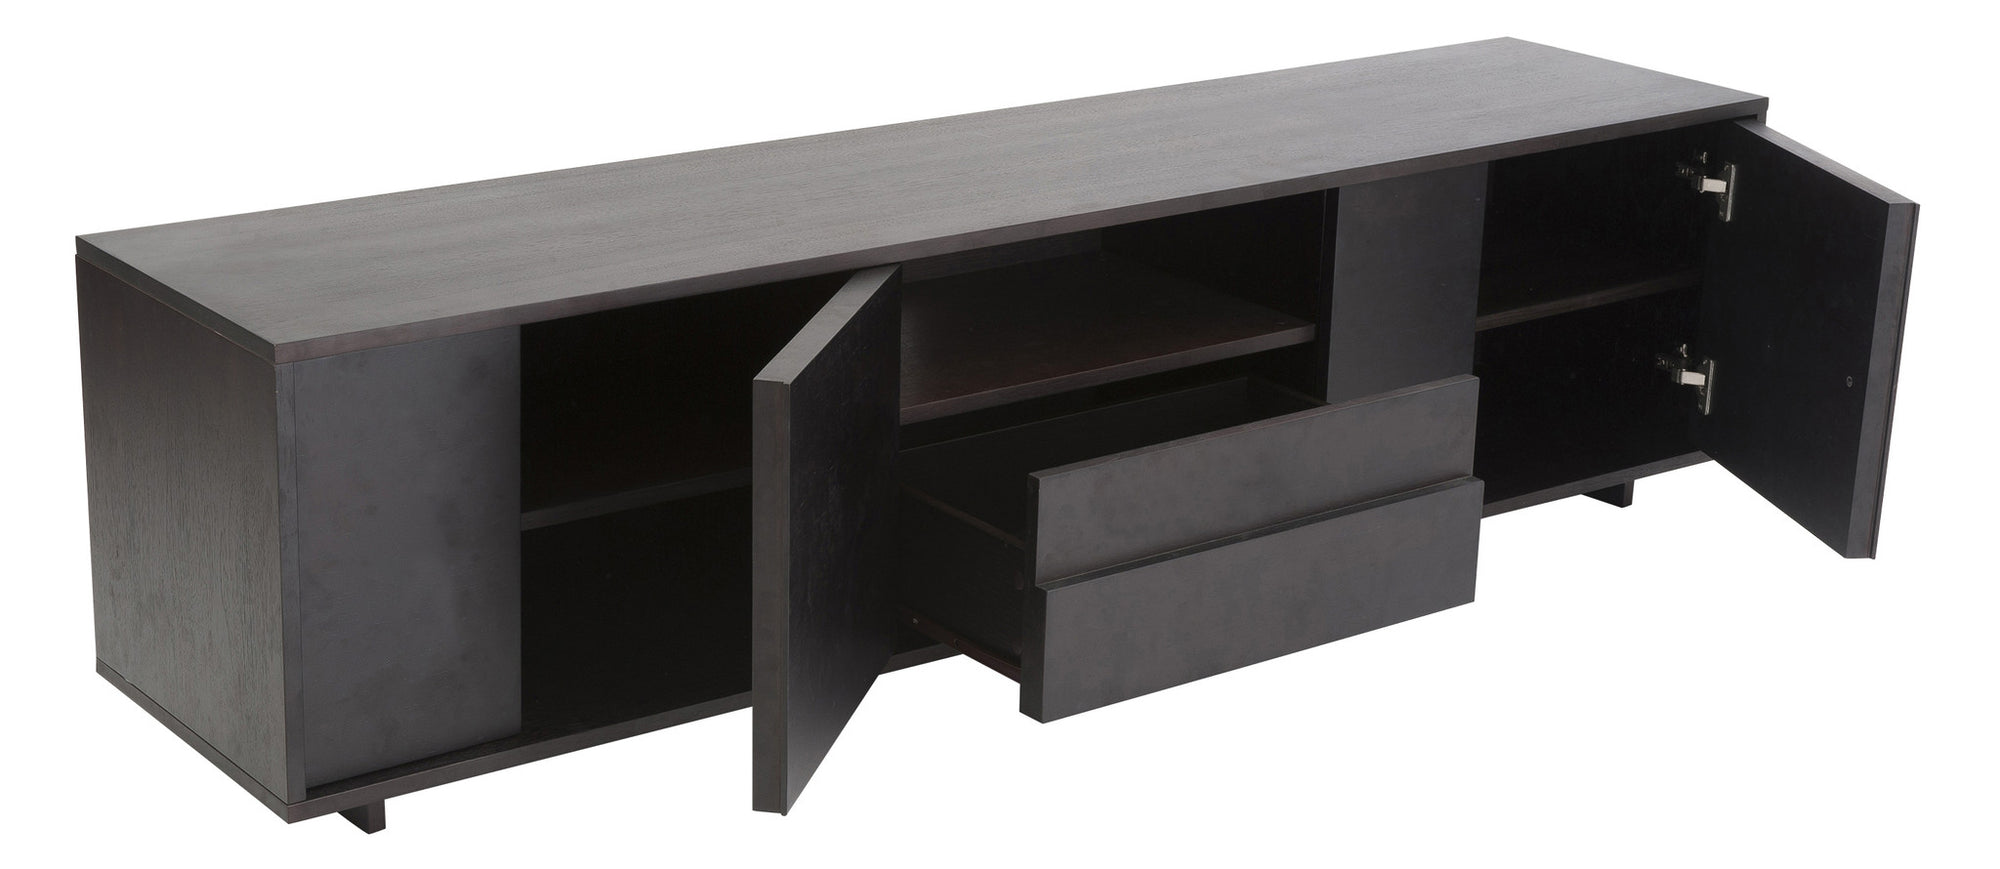 Chalais Media Stand Wenge